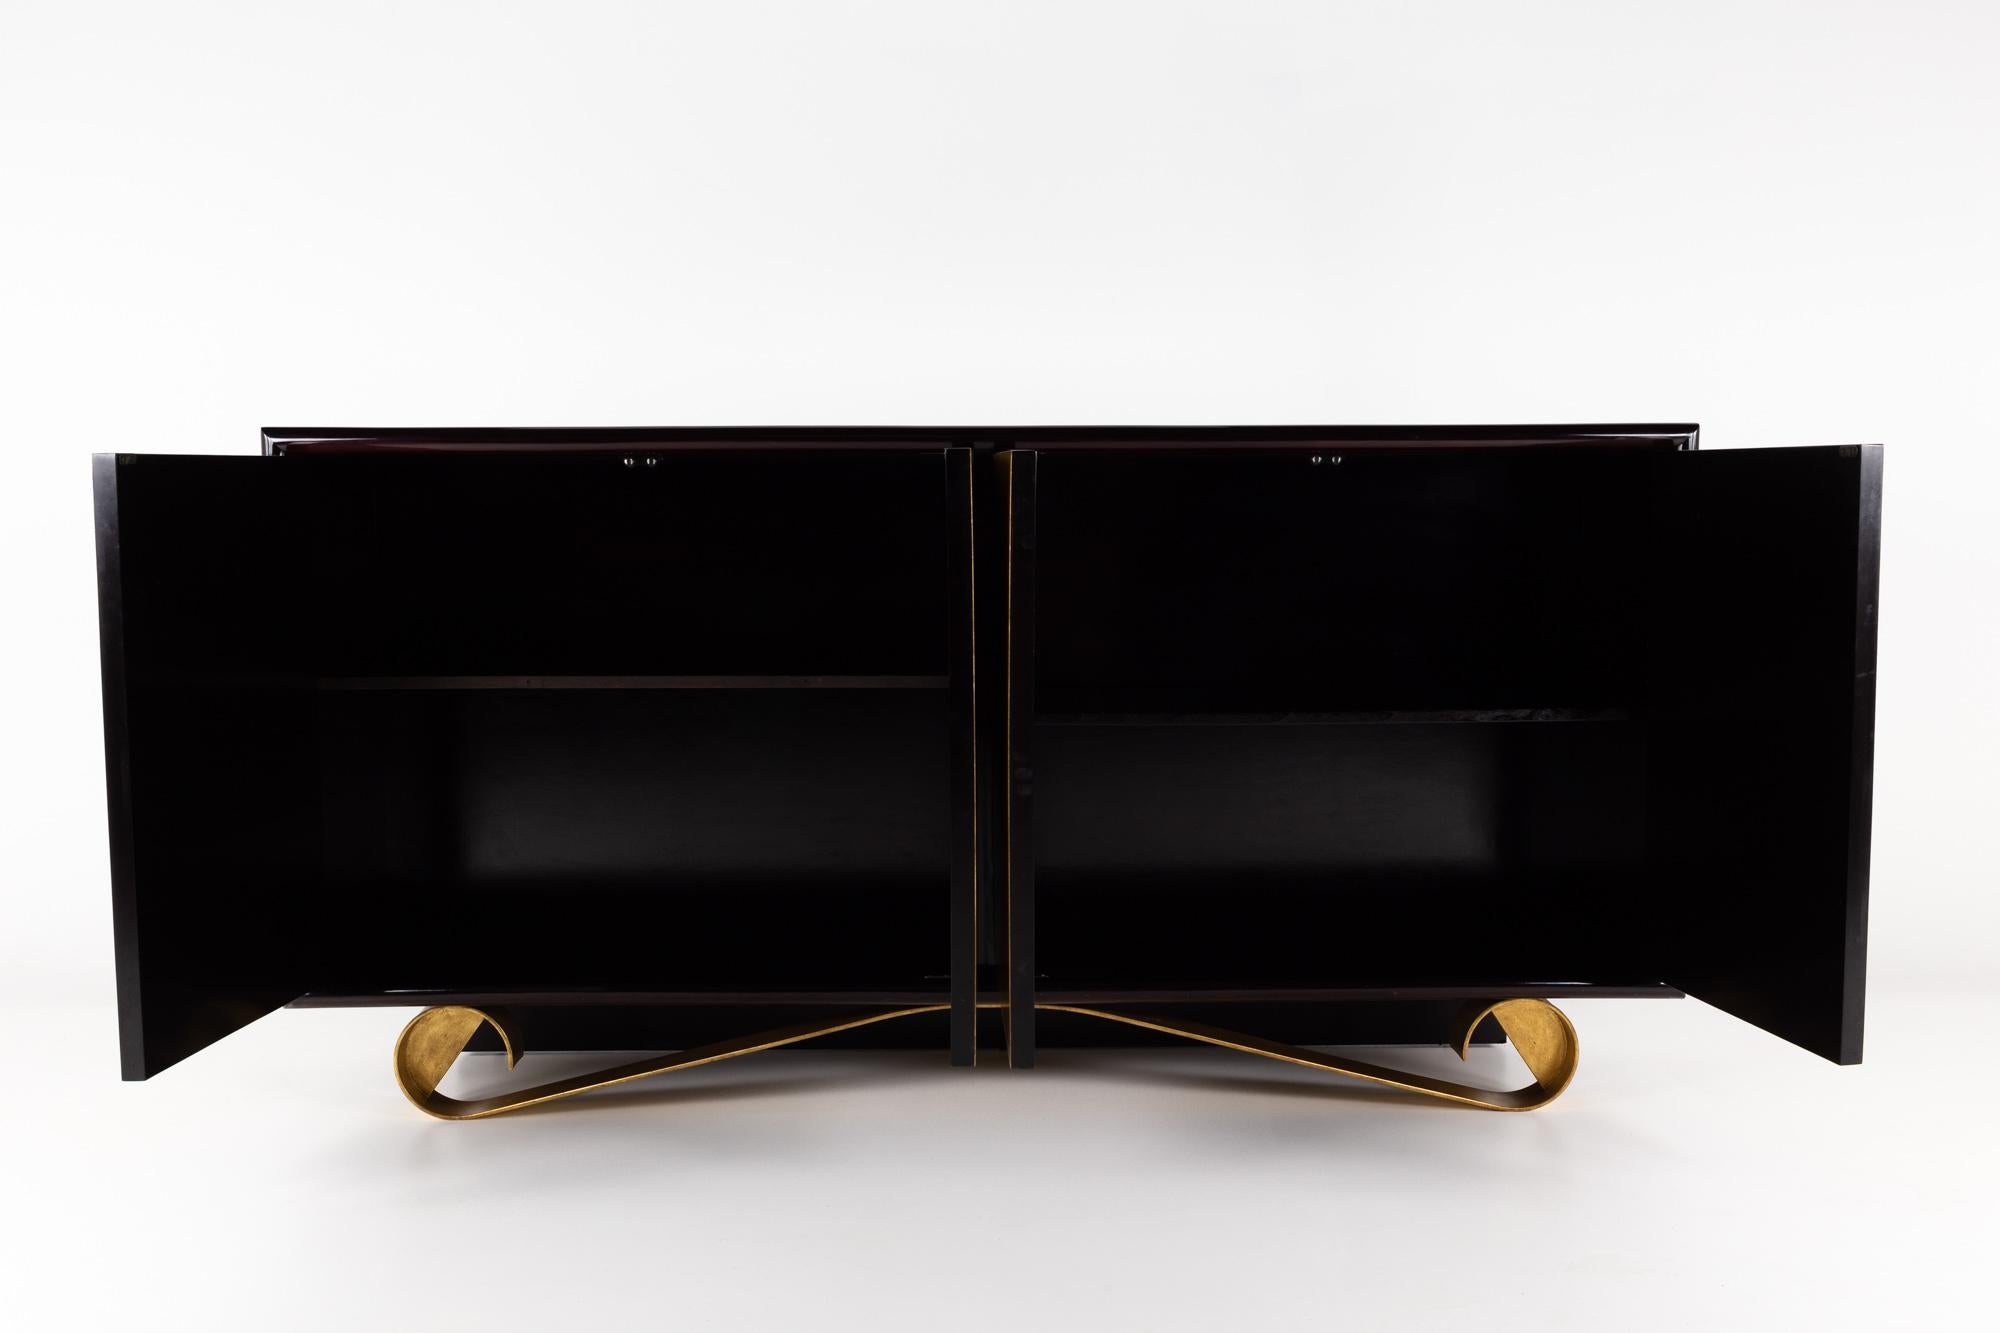 Jean de Merry contemporary cassetto sideboard

This sideboard measures: 78 wide x 17 deep x 39 inches high

This piece is in great vintage condition - although there is some residue on the far left doors and the front sits a bit lower than the